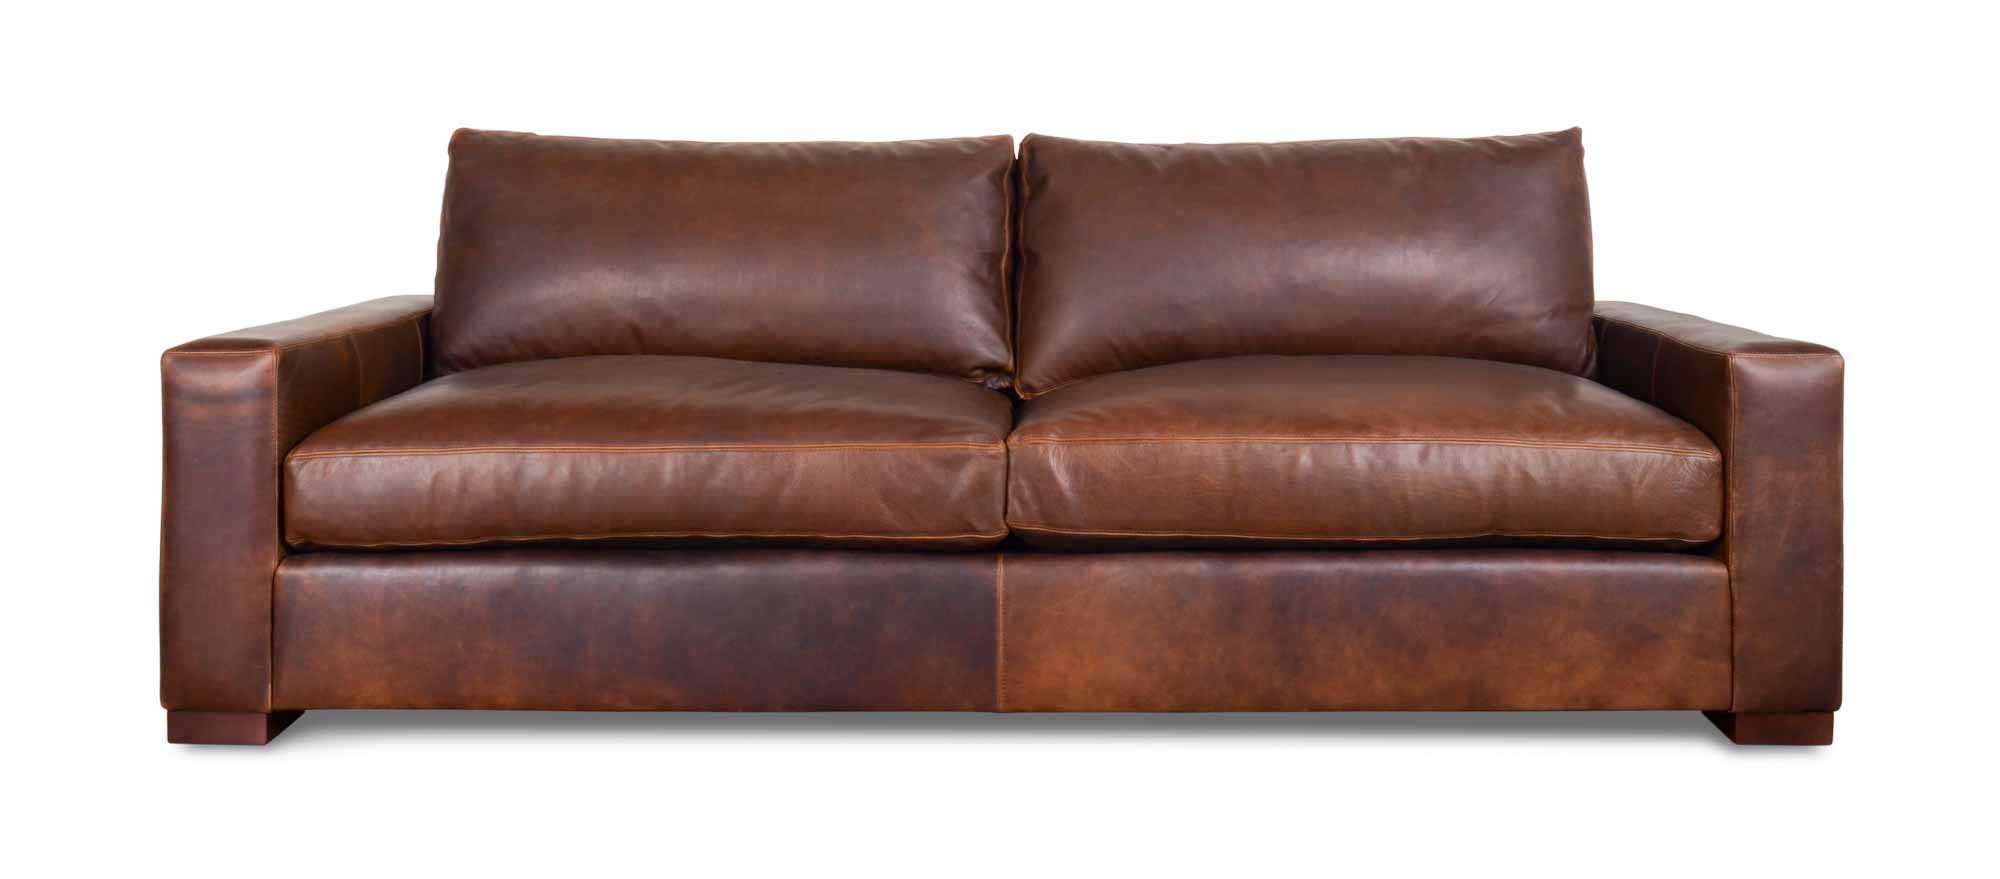 Cococohome Monroe Vs Rh Maxwell, Restoration Hardware Leather Couch Reviews